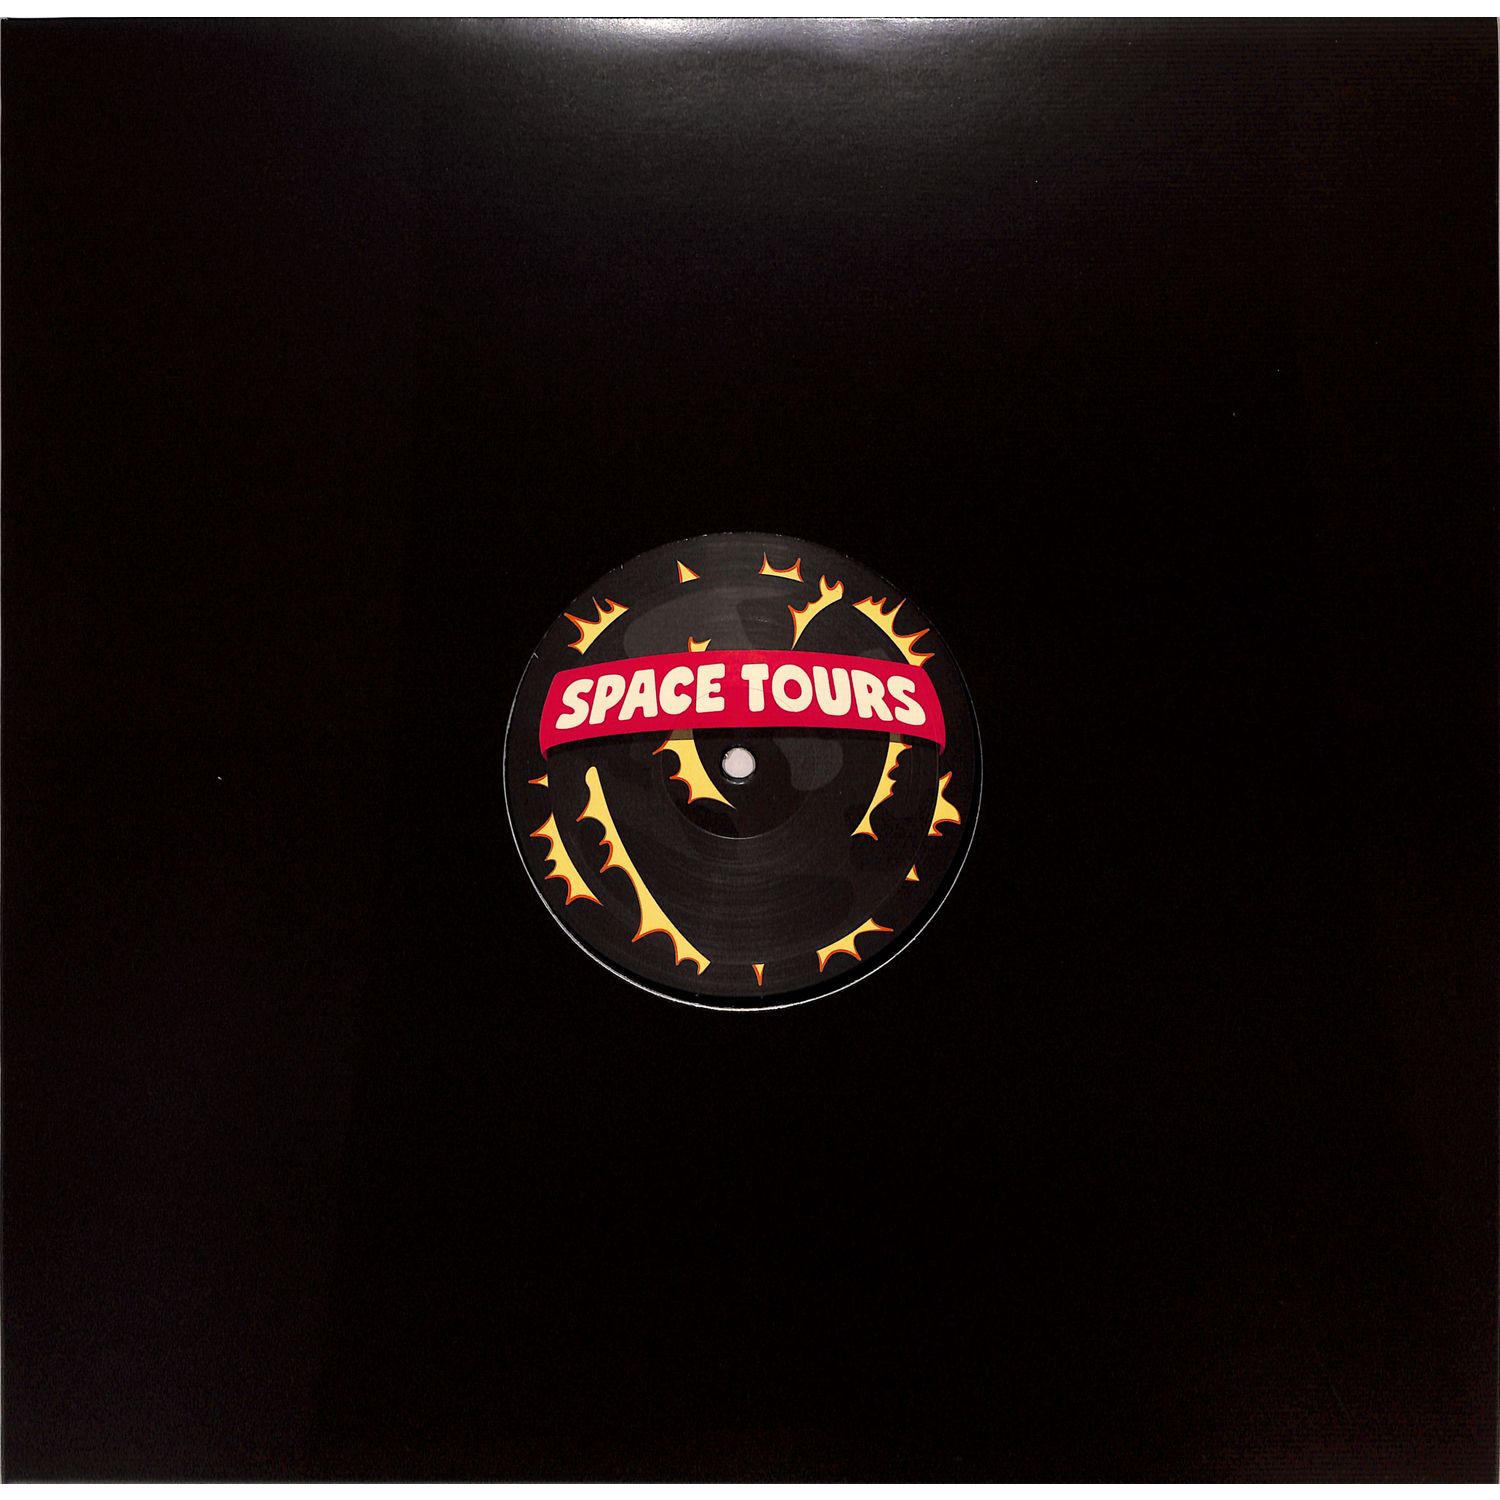 Mitch Wellings - SPACE TOURS 004